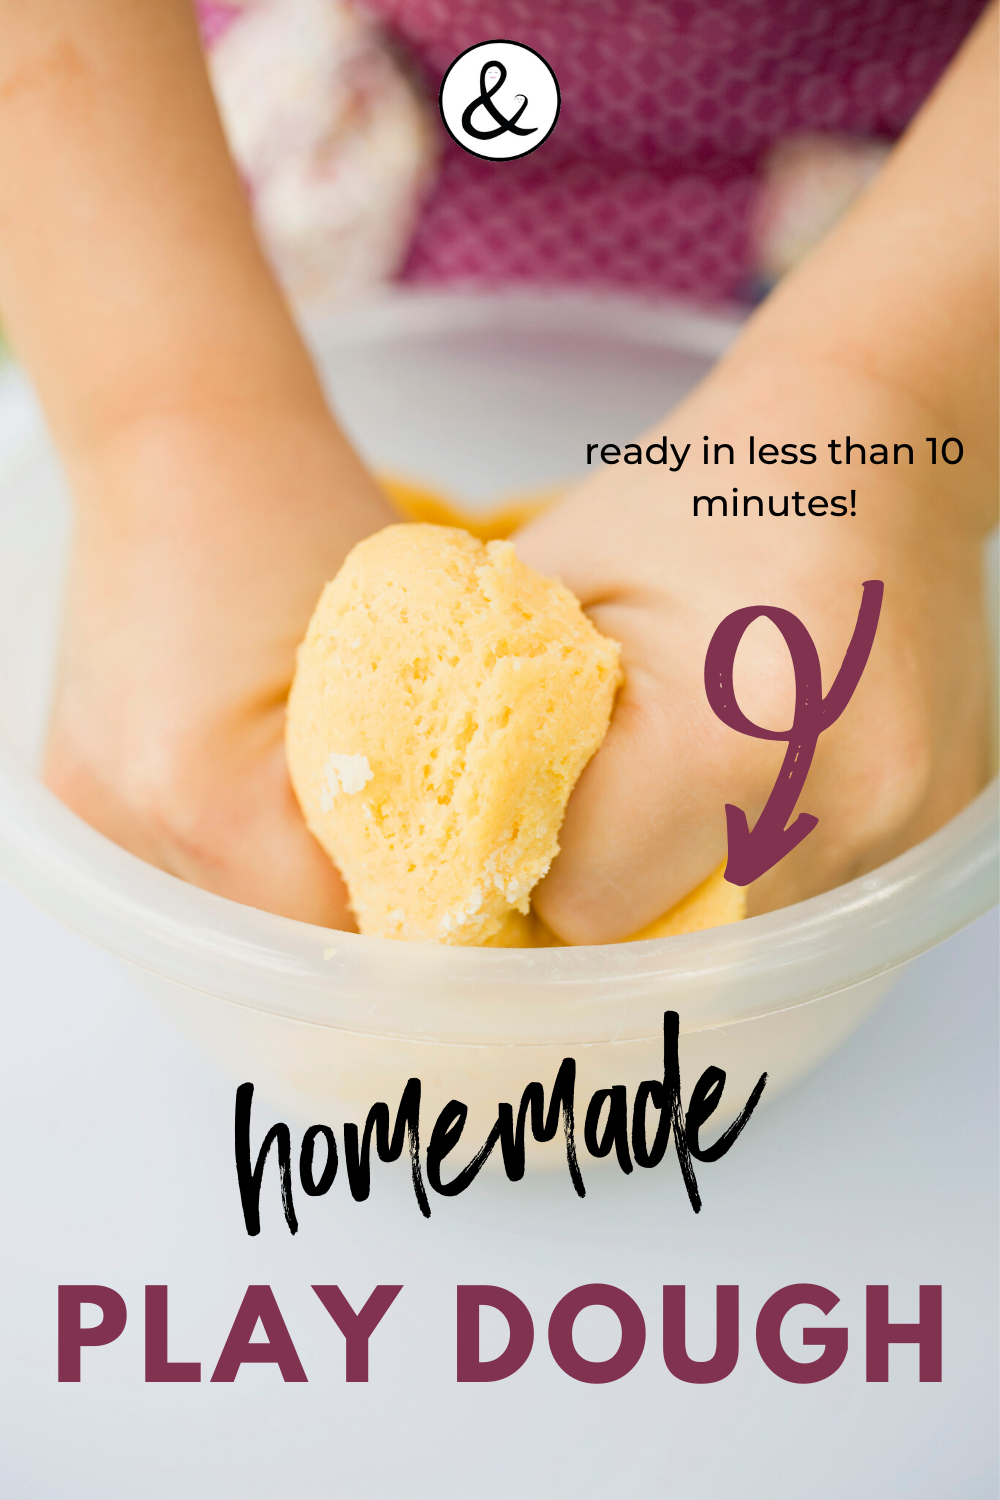 Homemade Play Dough in 10 Minutes or Less